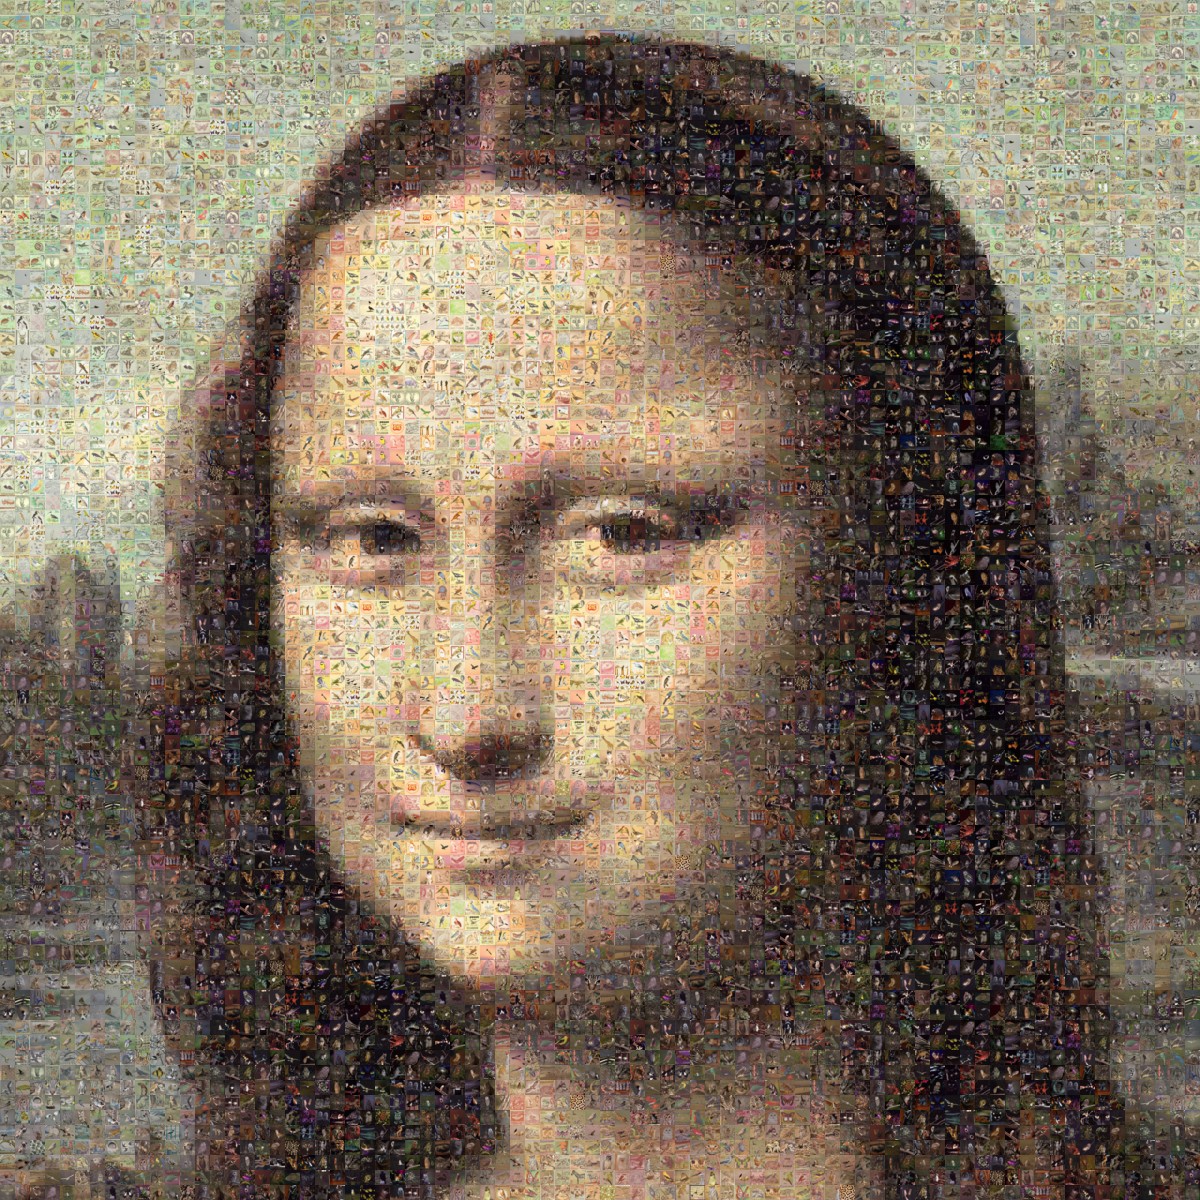 an altered image of the monaroce woman's face